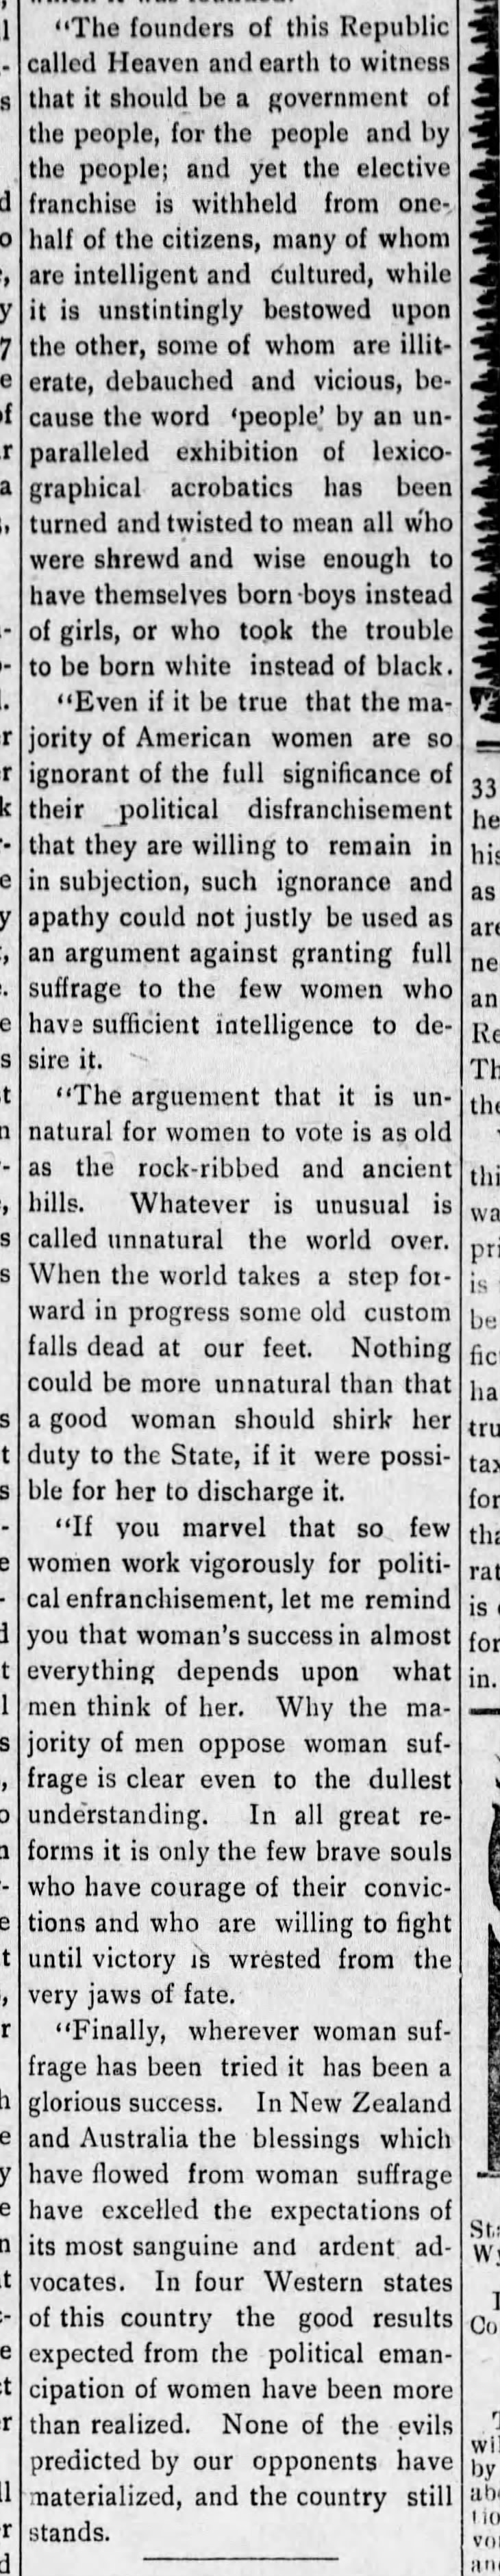 Excerpt from Mary Church Terrell's address "The Justice of Woman Suffrage"